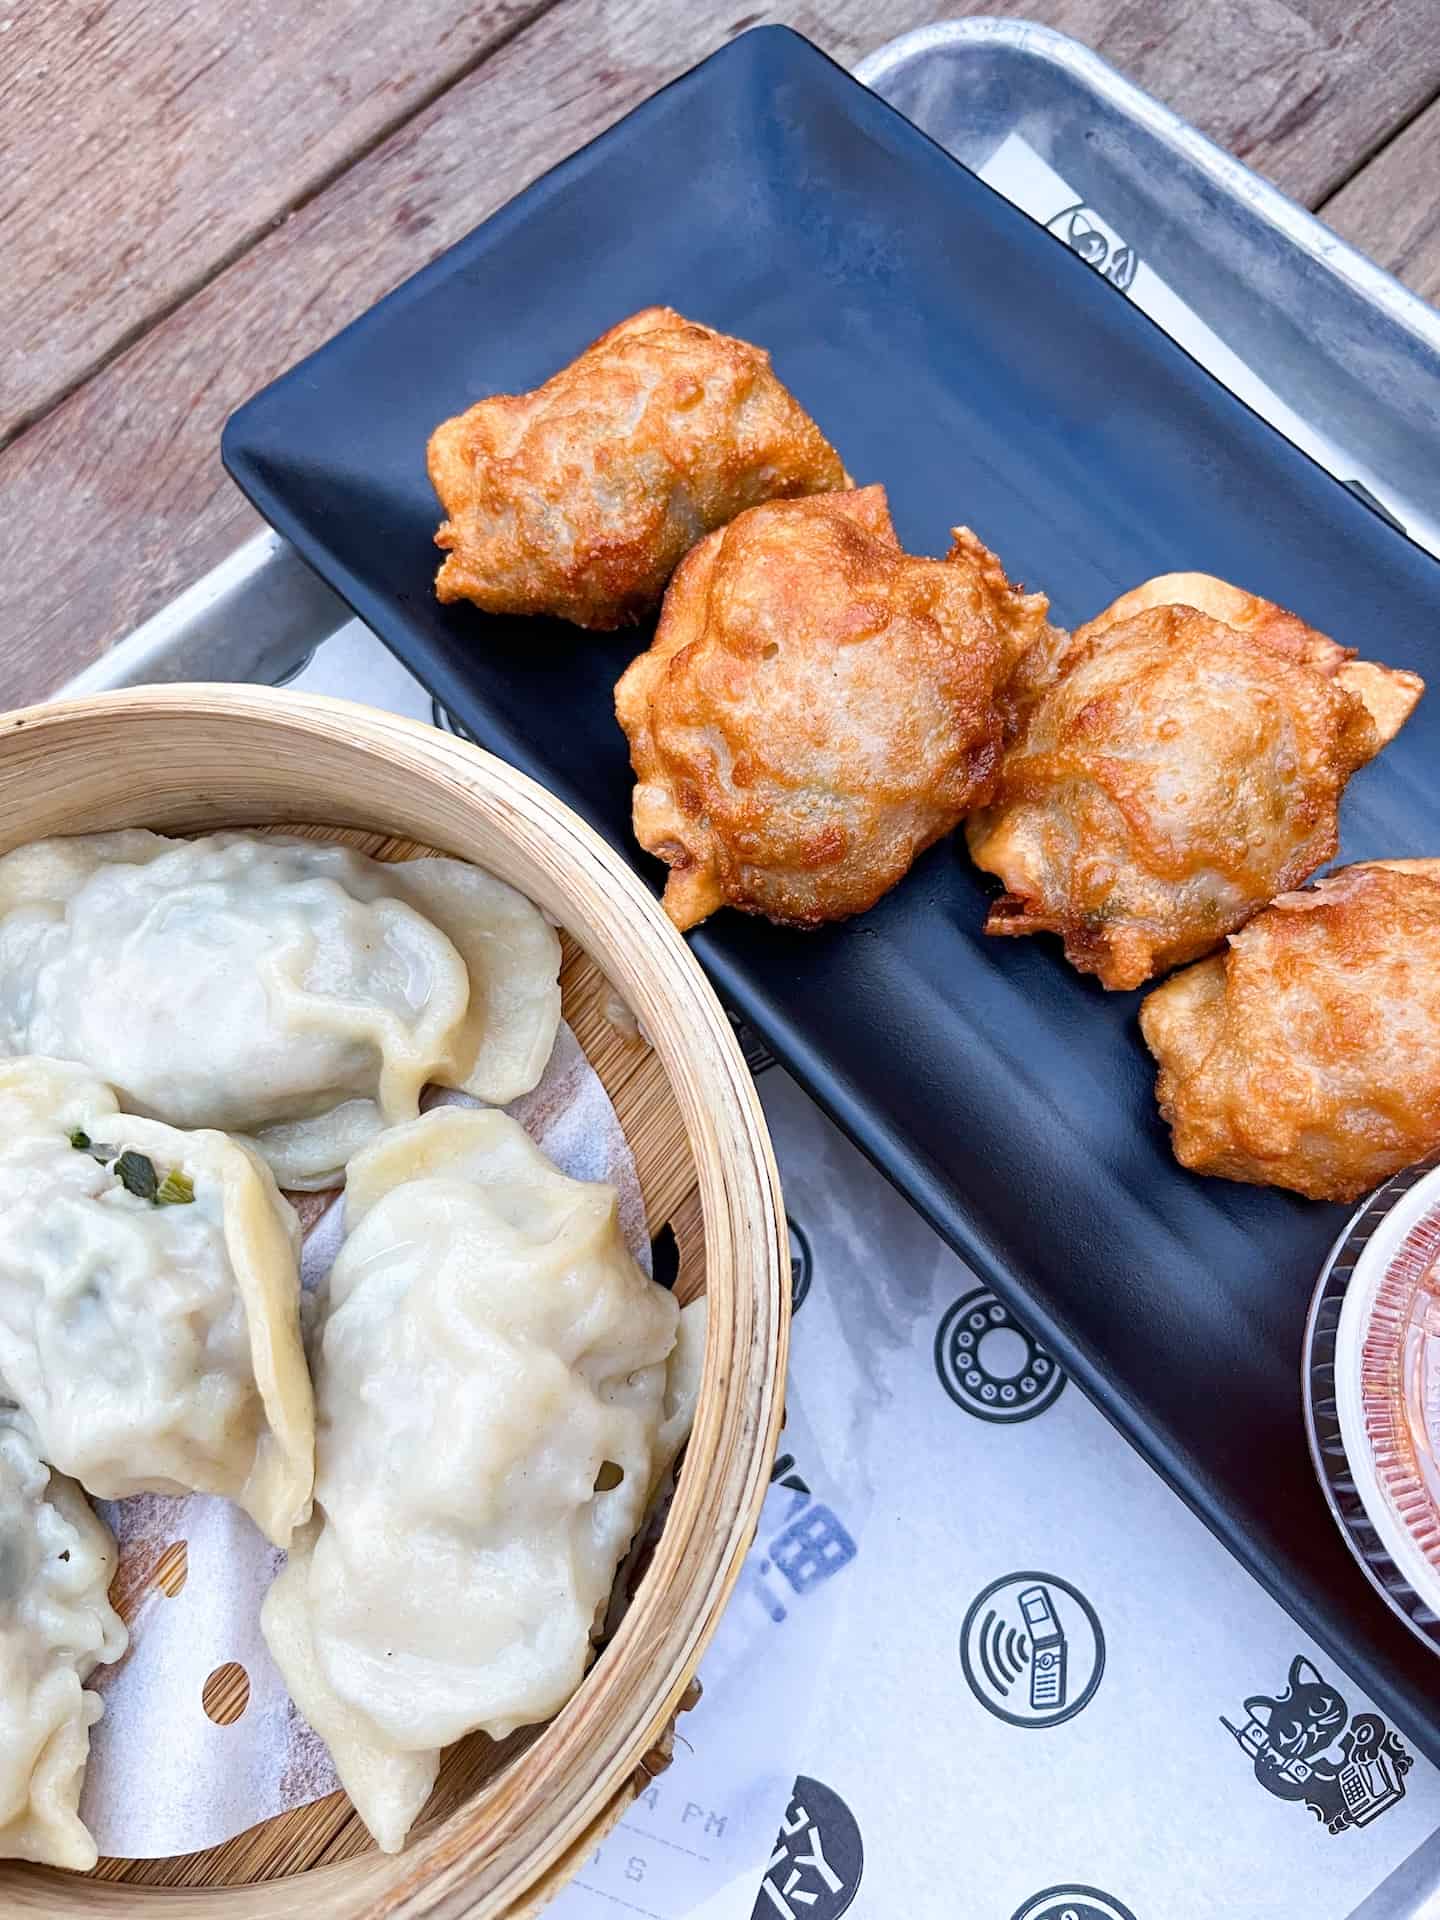 Steamed and fried wontons from a restaurant in Wynwood, Miami.